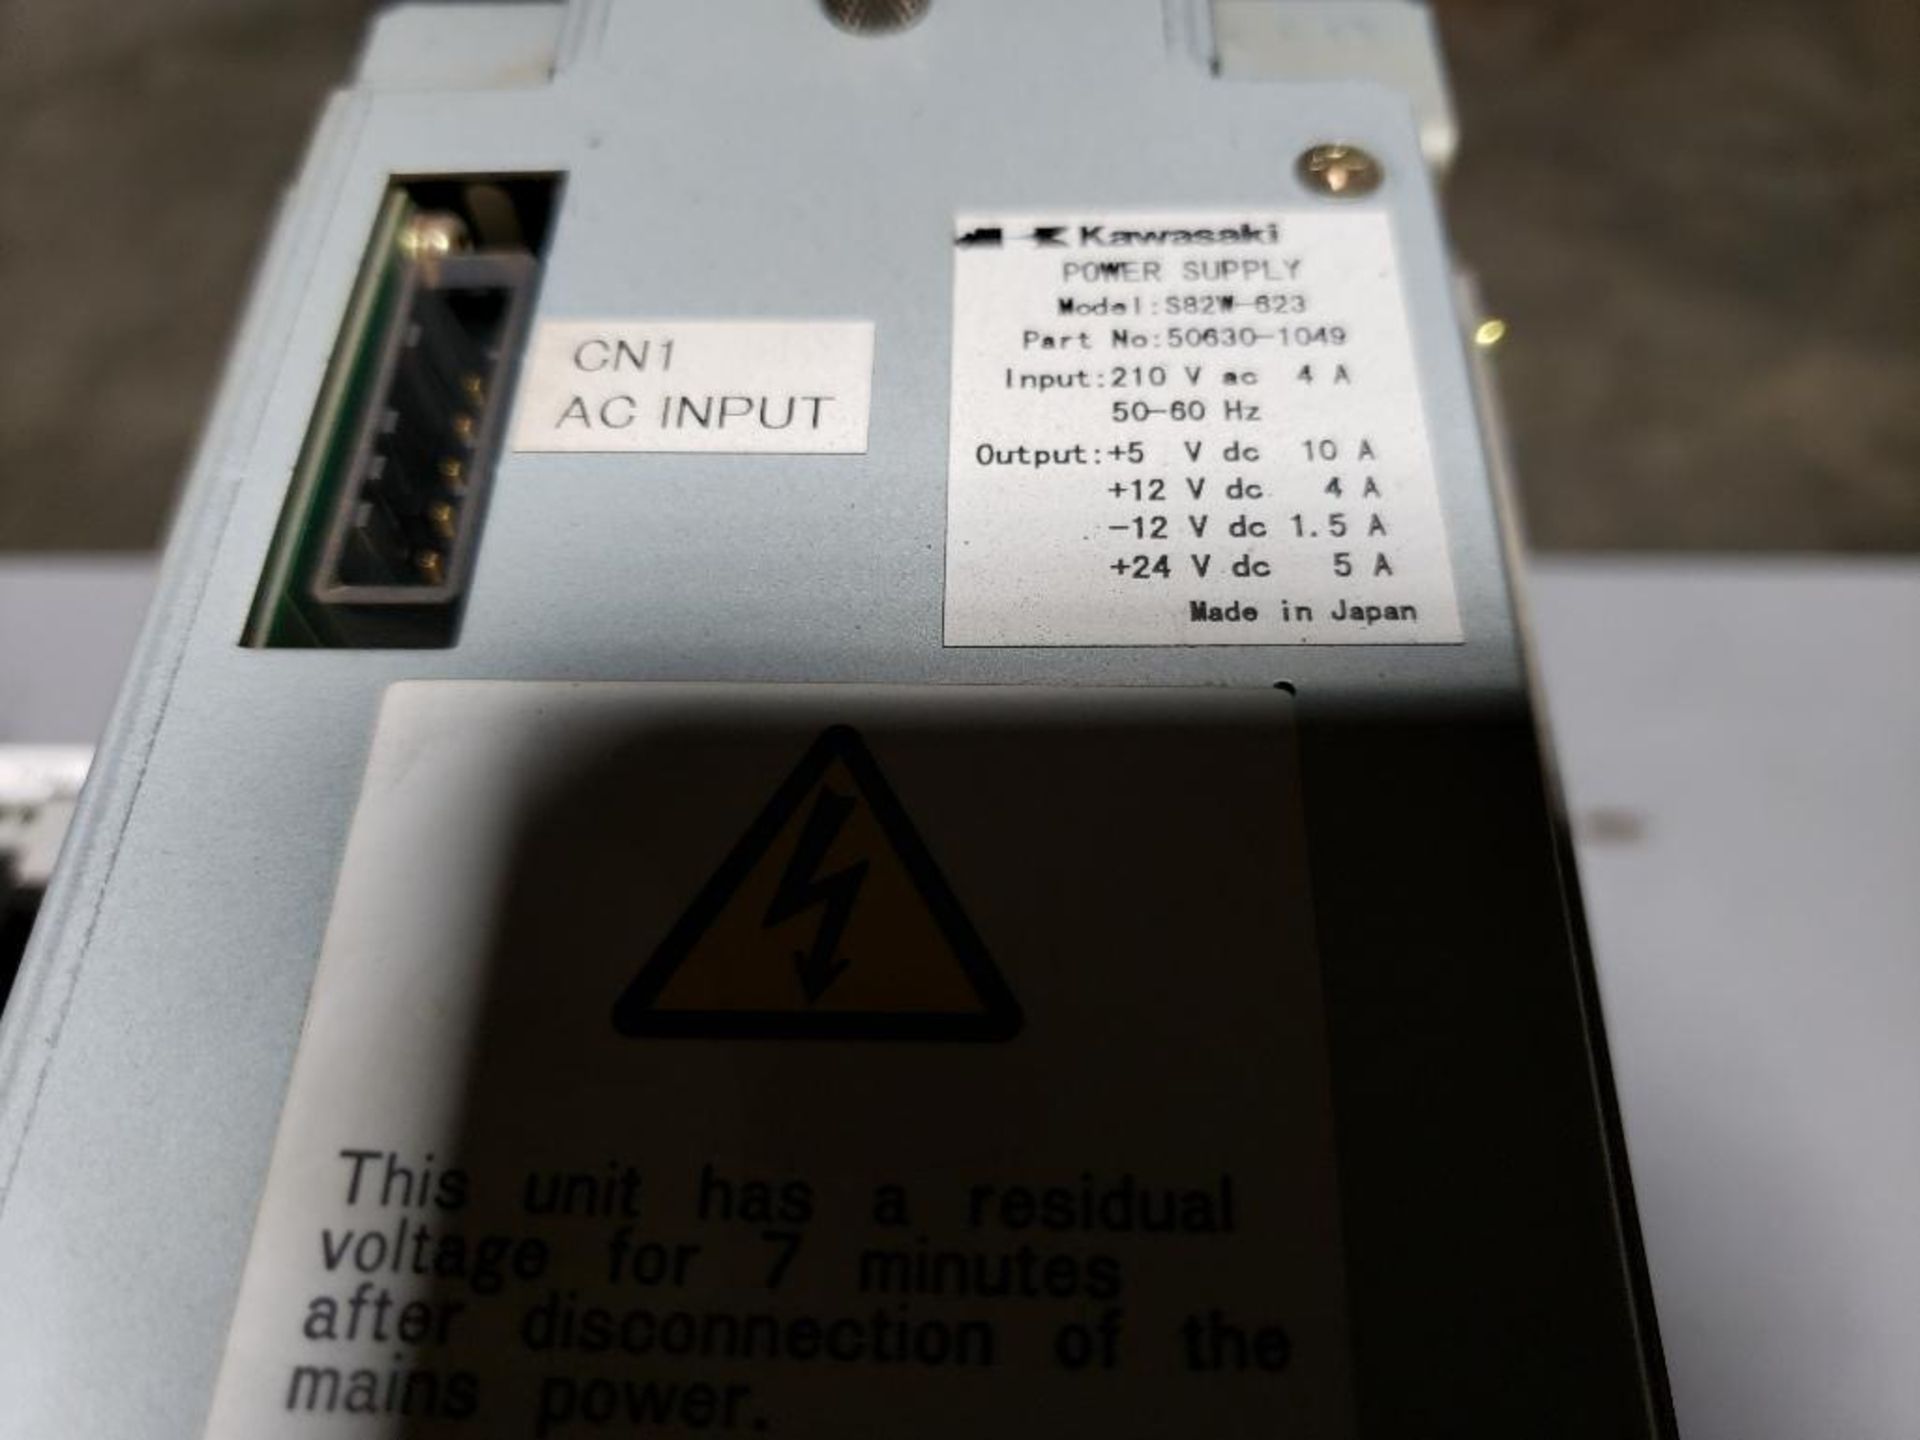 Kawasaki power supply and PLC. Model S82W-623. Part number 50630-1049. - Image 2 of 3